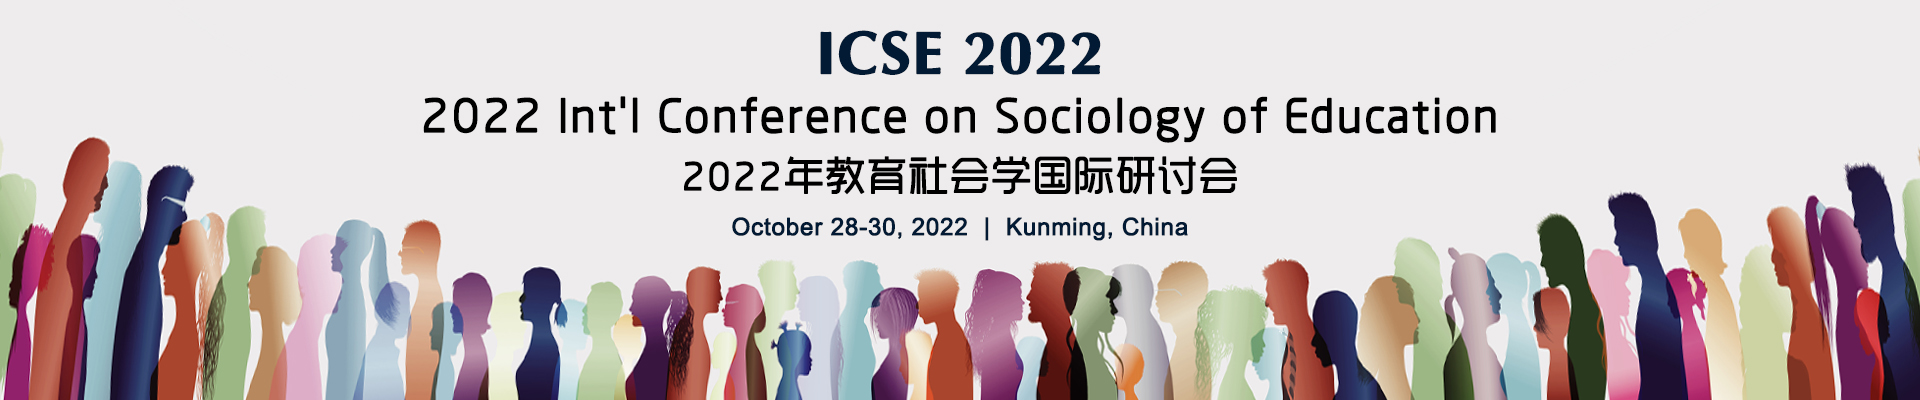 2022 Int'l Conference on Sociology of Education (ICSE2022)